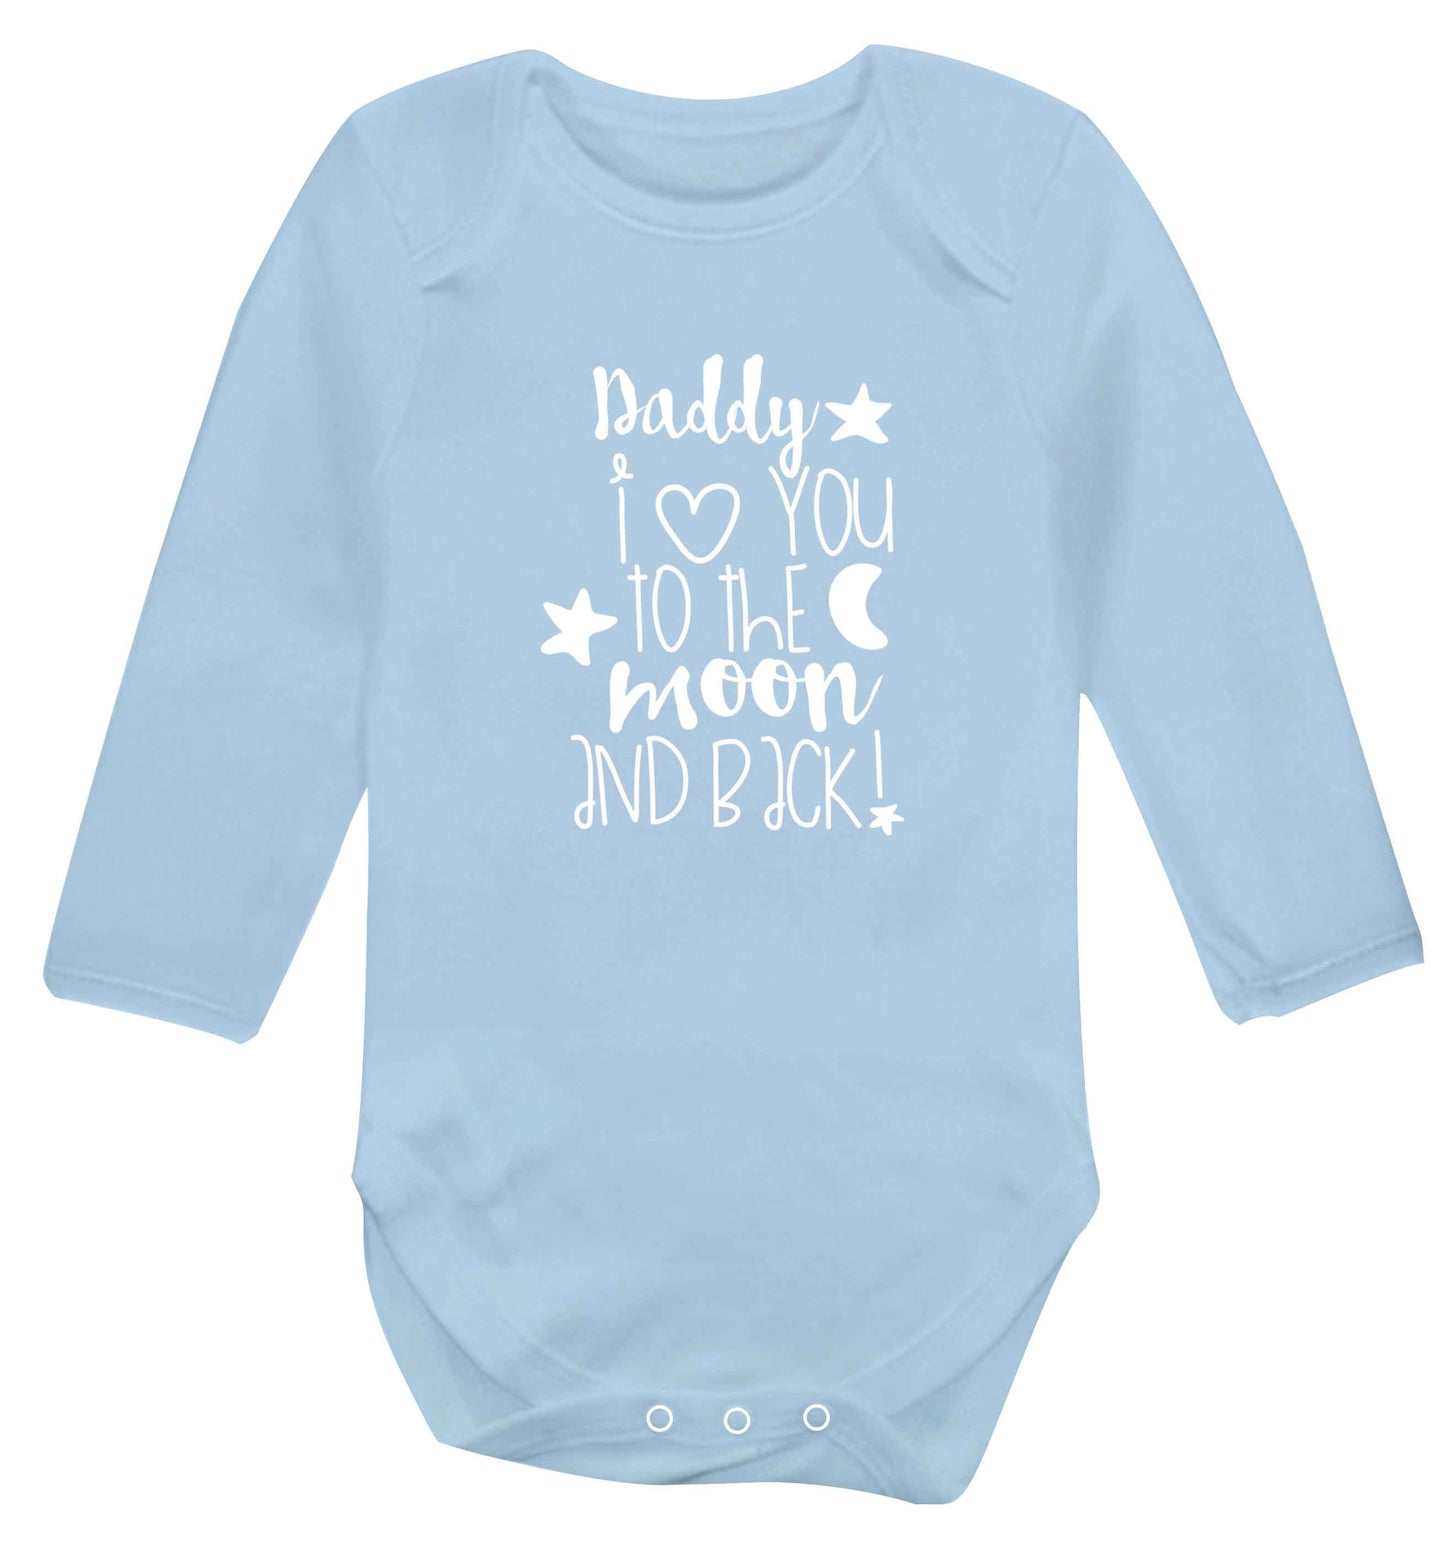 Daddy I love you to the moon and back baby vest long sleeved pale blue 6-12 months